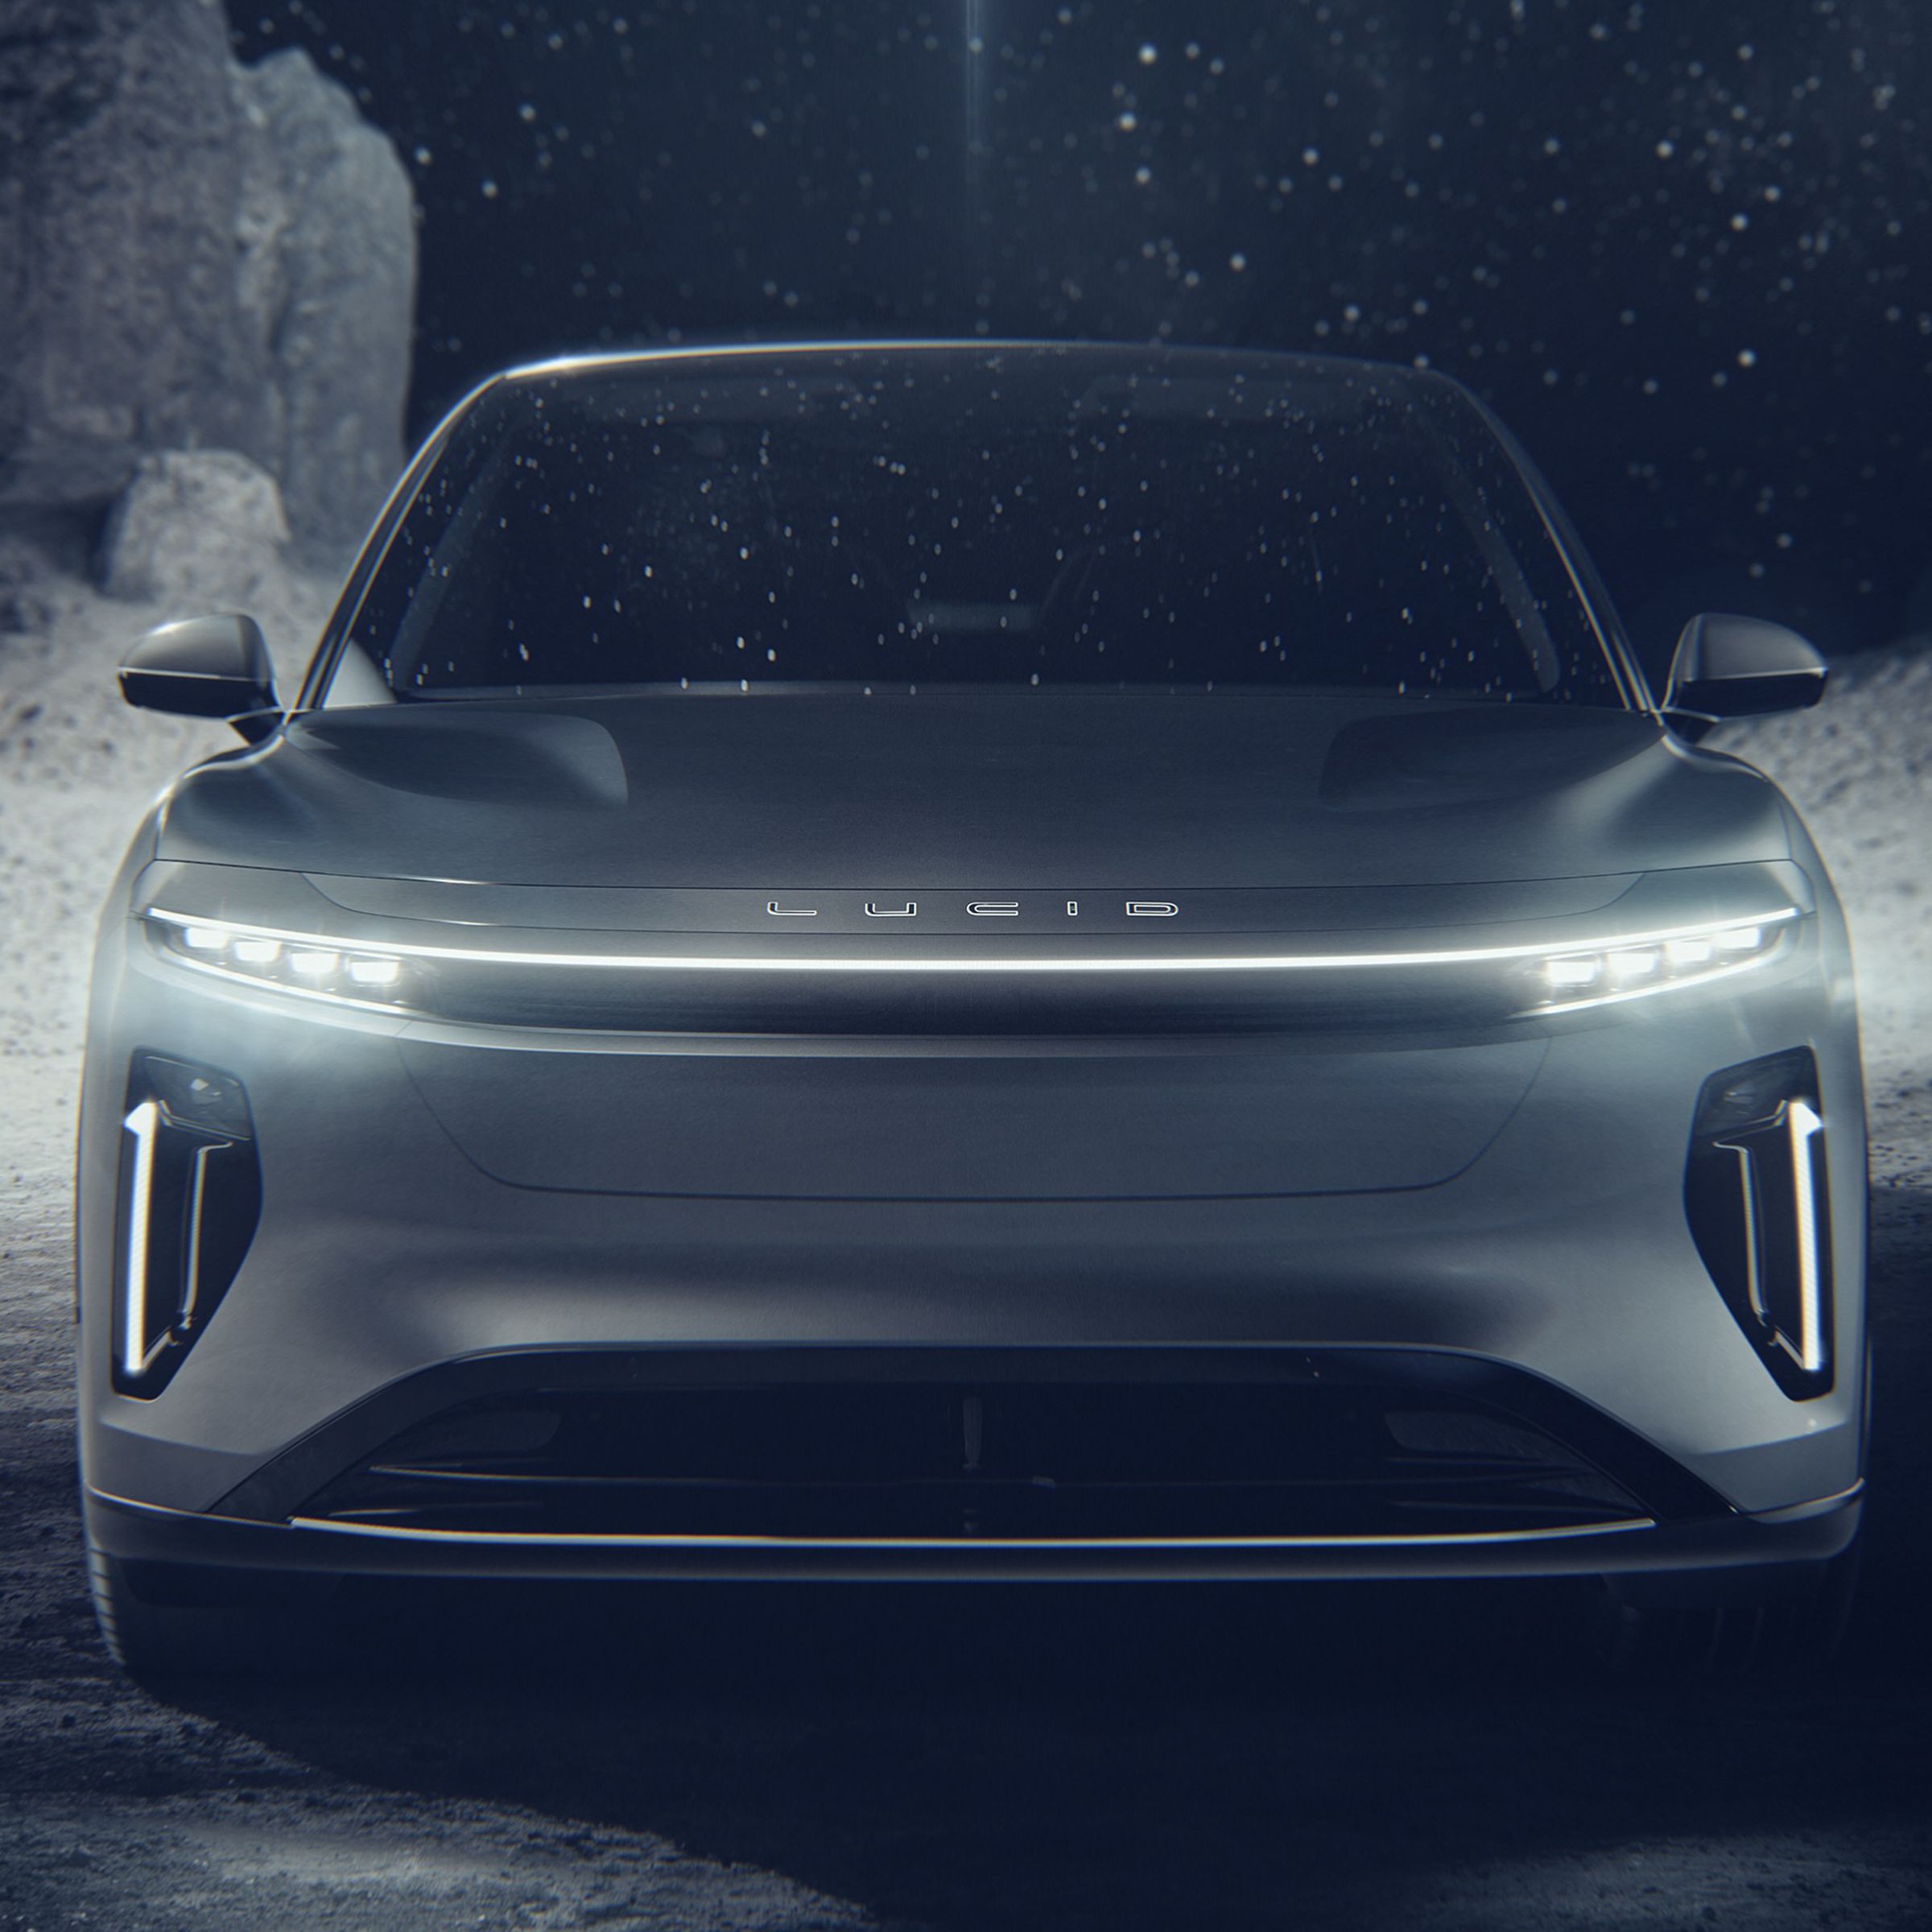 Front end of the Lucid Gravity — it’s an SUV with an LED bar light and LEF headlights with a tall nose that has no grille, a large air intake in the bottom, and air holes on both sides of the bumper. The car is in a rocky and dark environment.